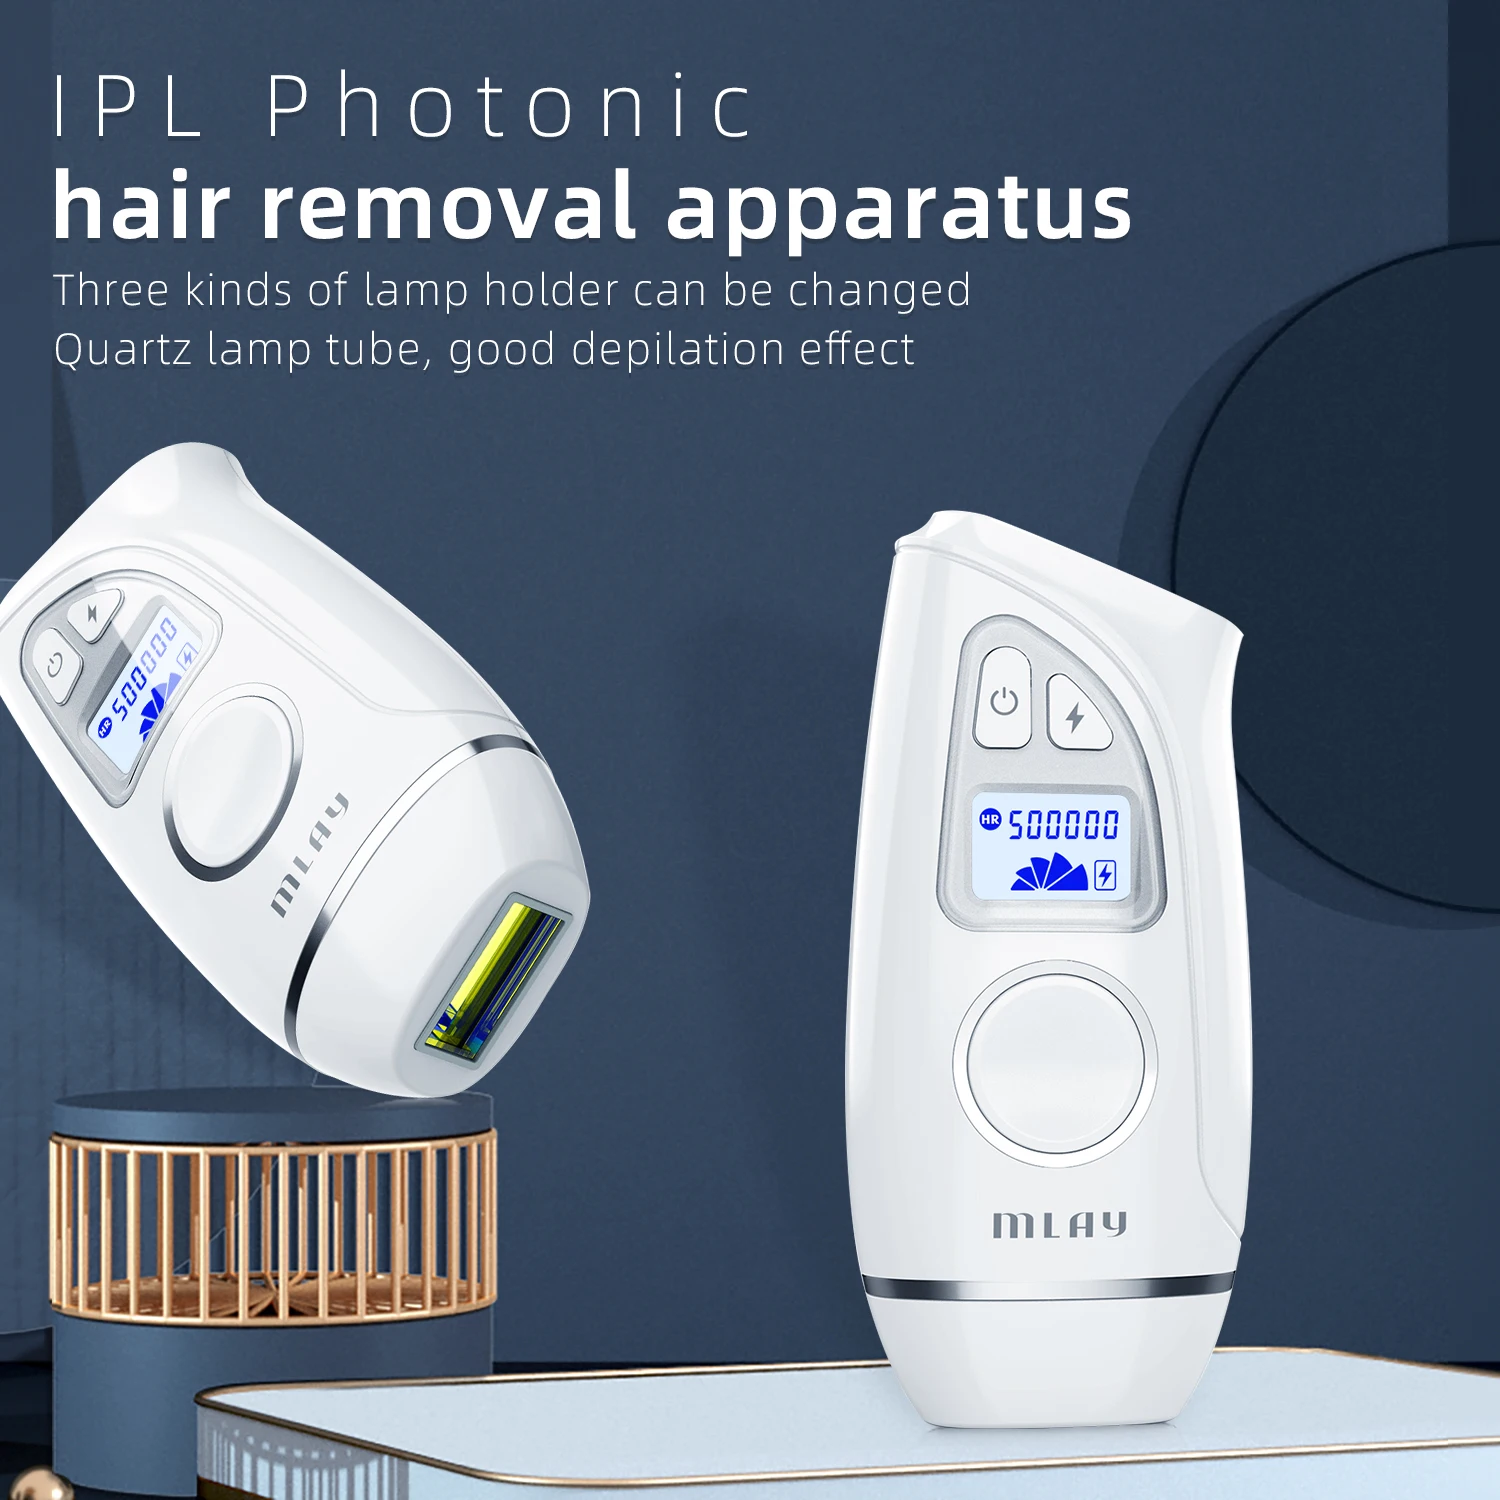 MLAY T7 Painless Facial Mobile Phone IPL Hair Removal Device for Skin Rejuvenation and Hair Removal in Bikini Armpit Area